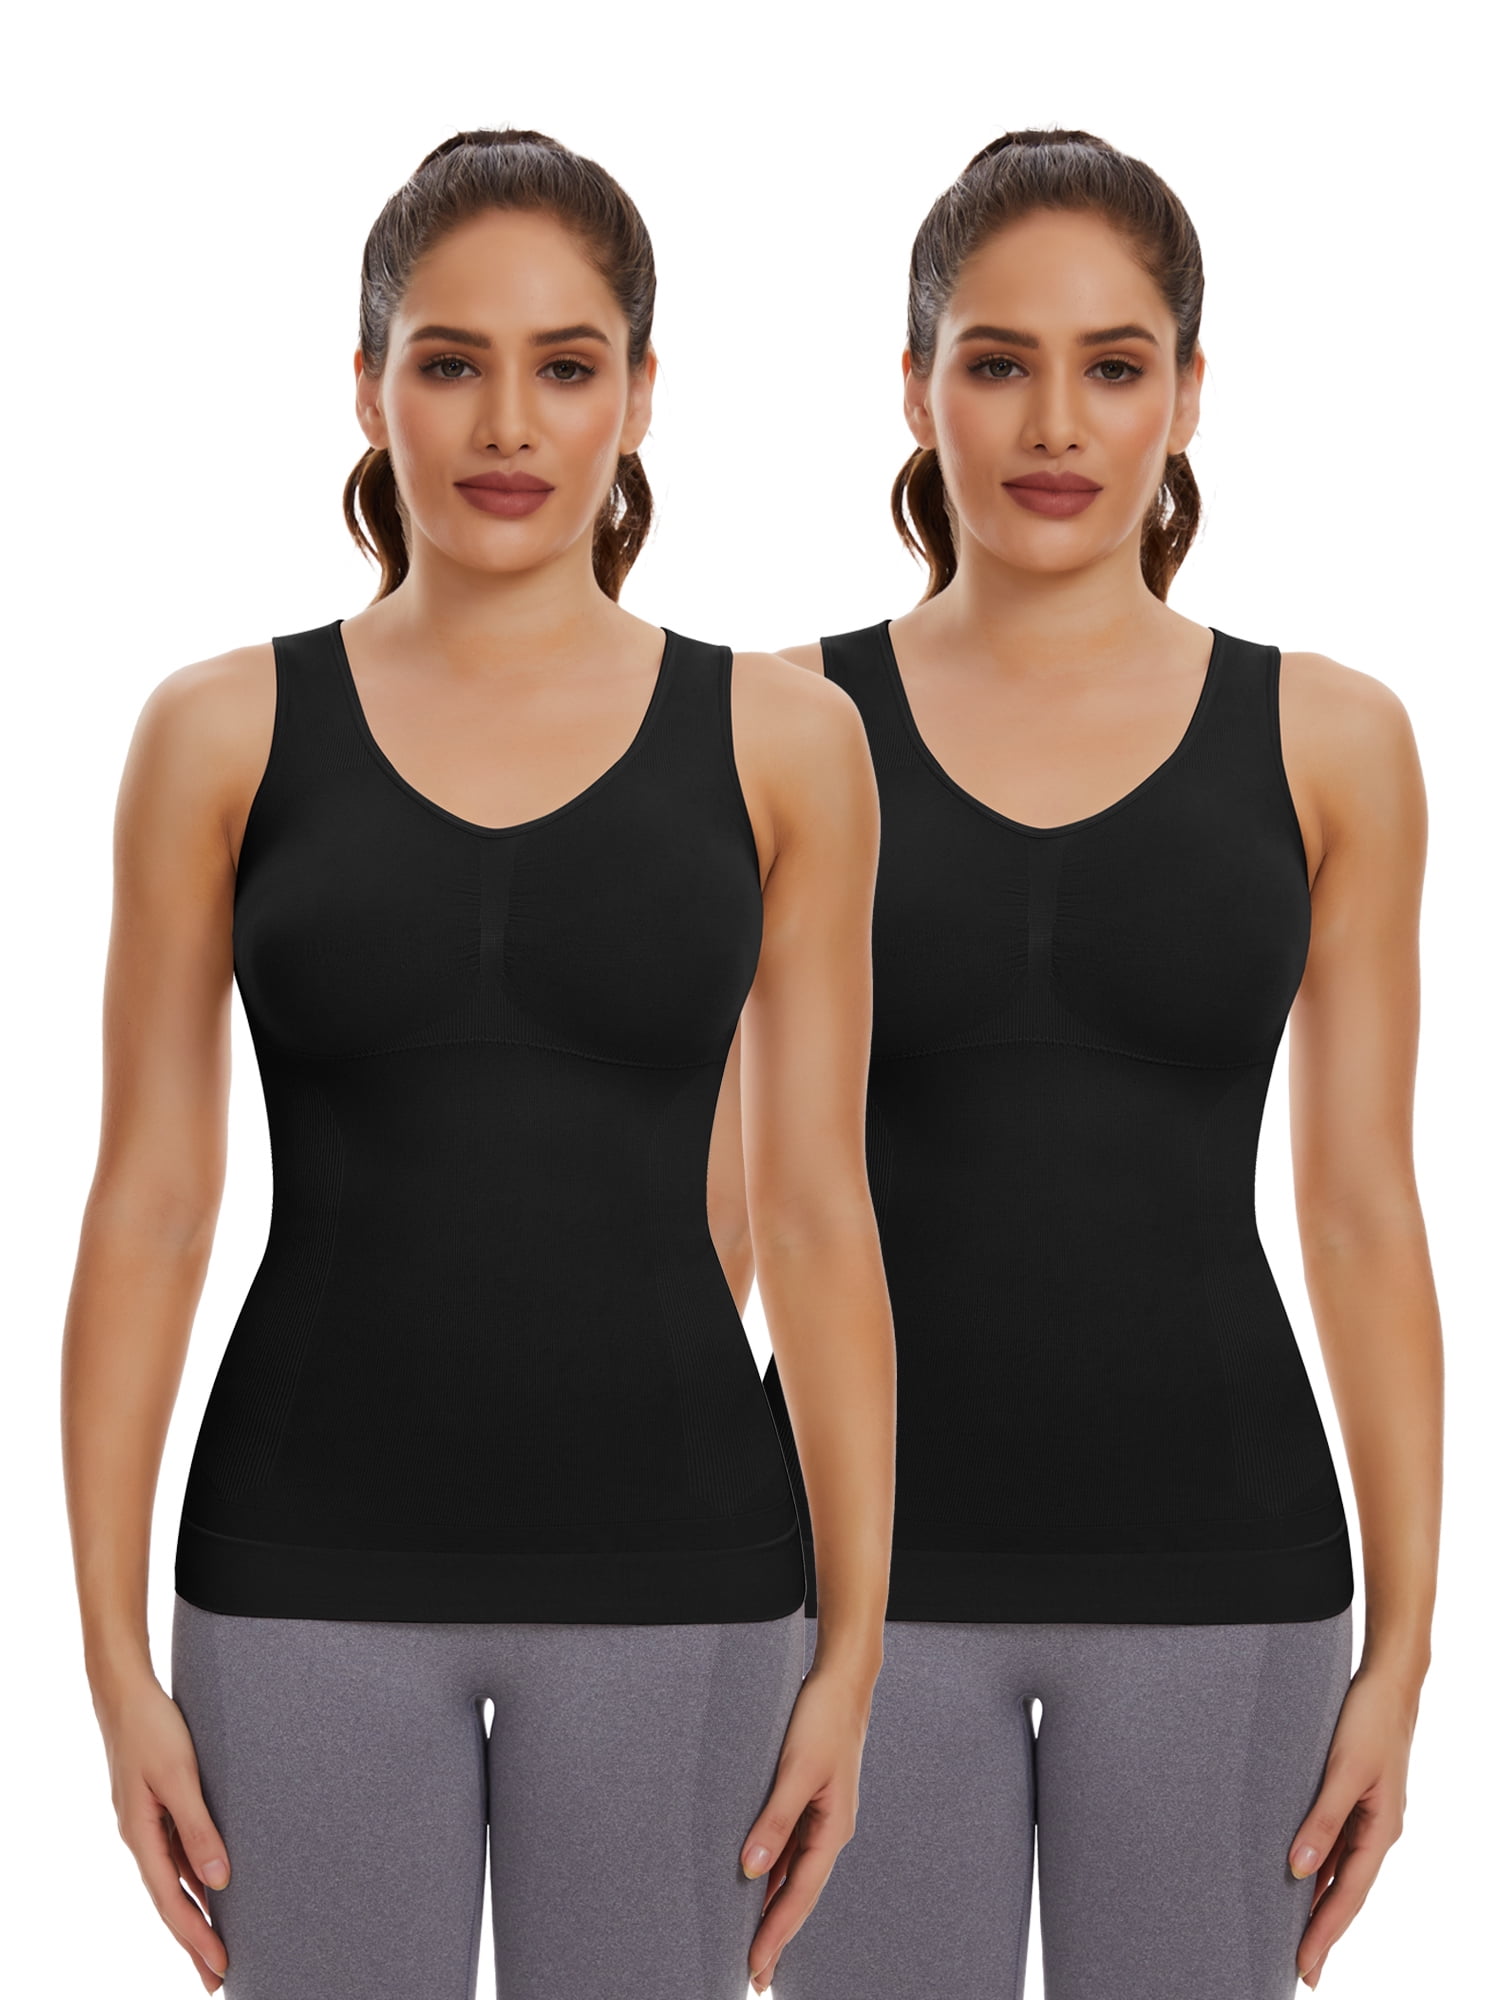 COMFREE Camisoles for Women with Built in Bra Slimming Cami Shaper